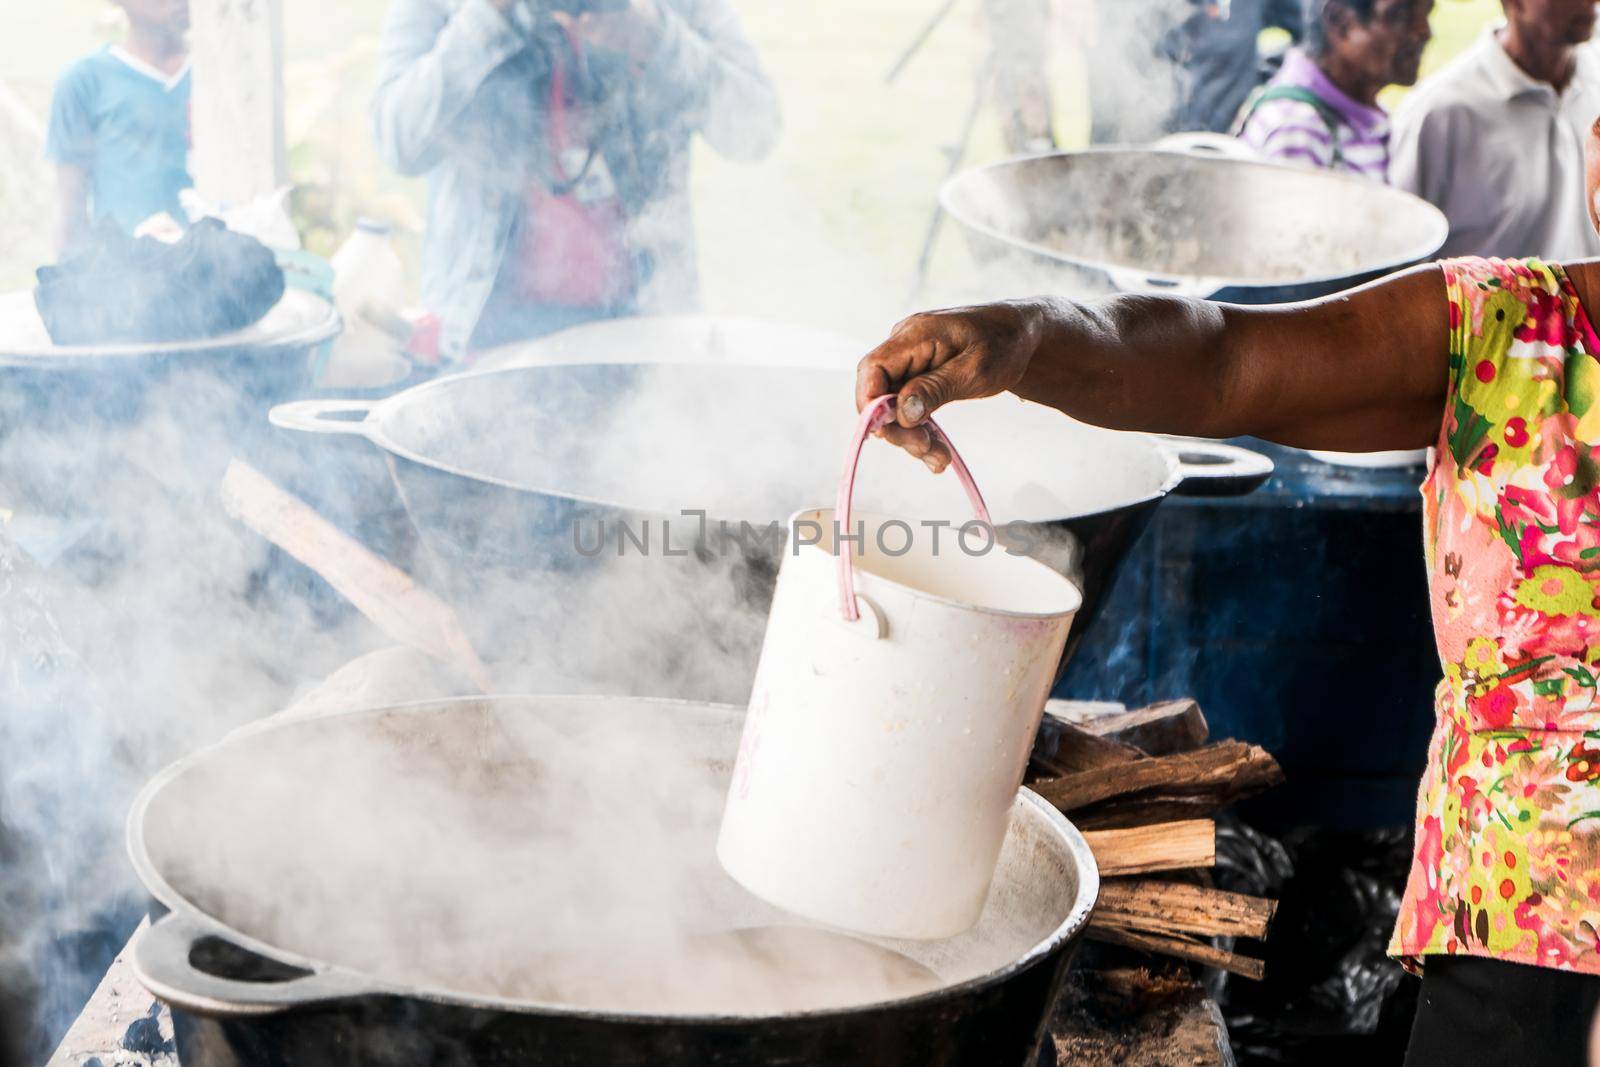 Distributing beef soup known as Luk Luk, a typical dish of the indigenous communities of the Caribbean Coast of Nicaragua and Central America